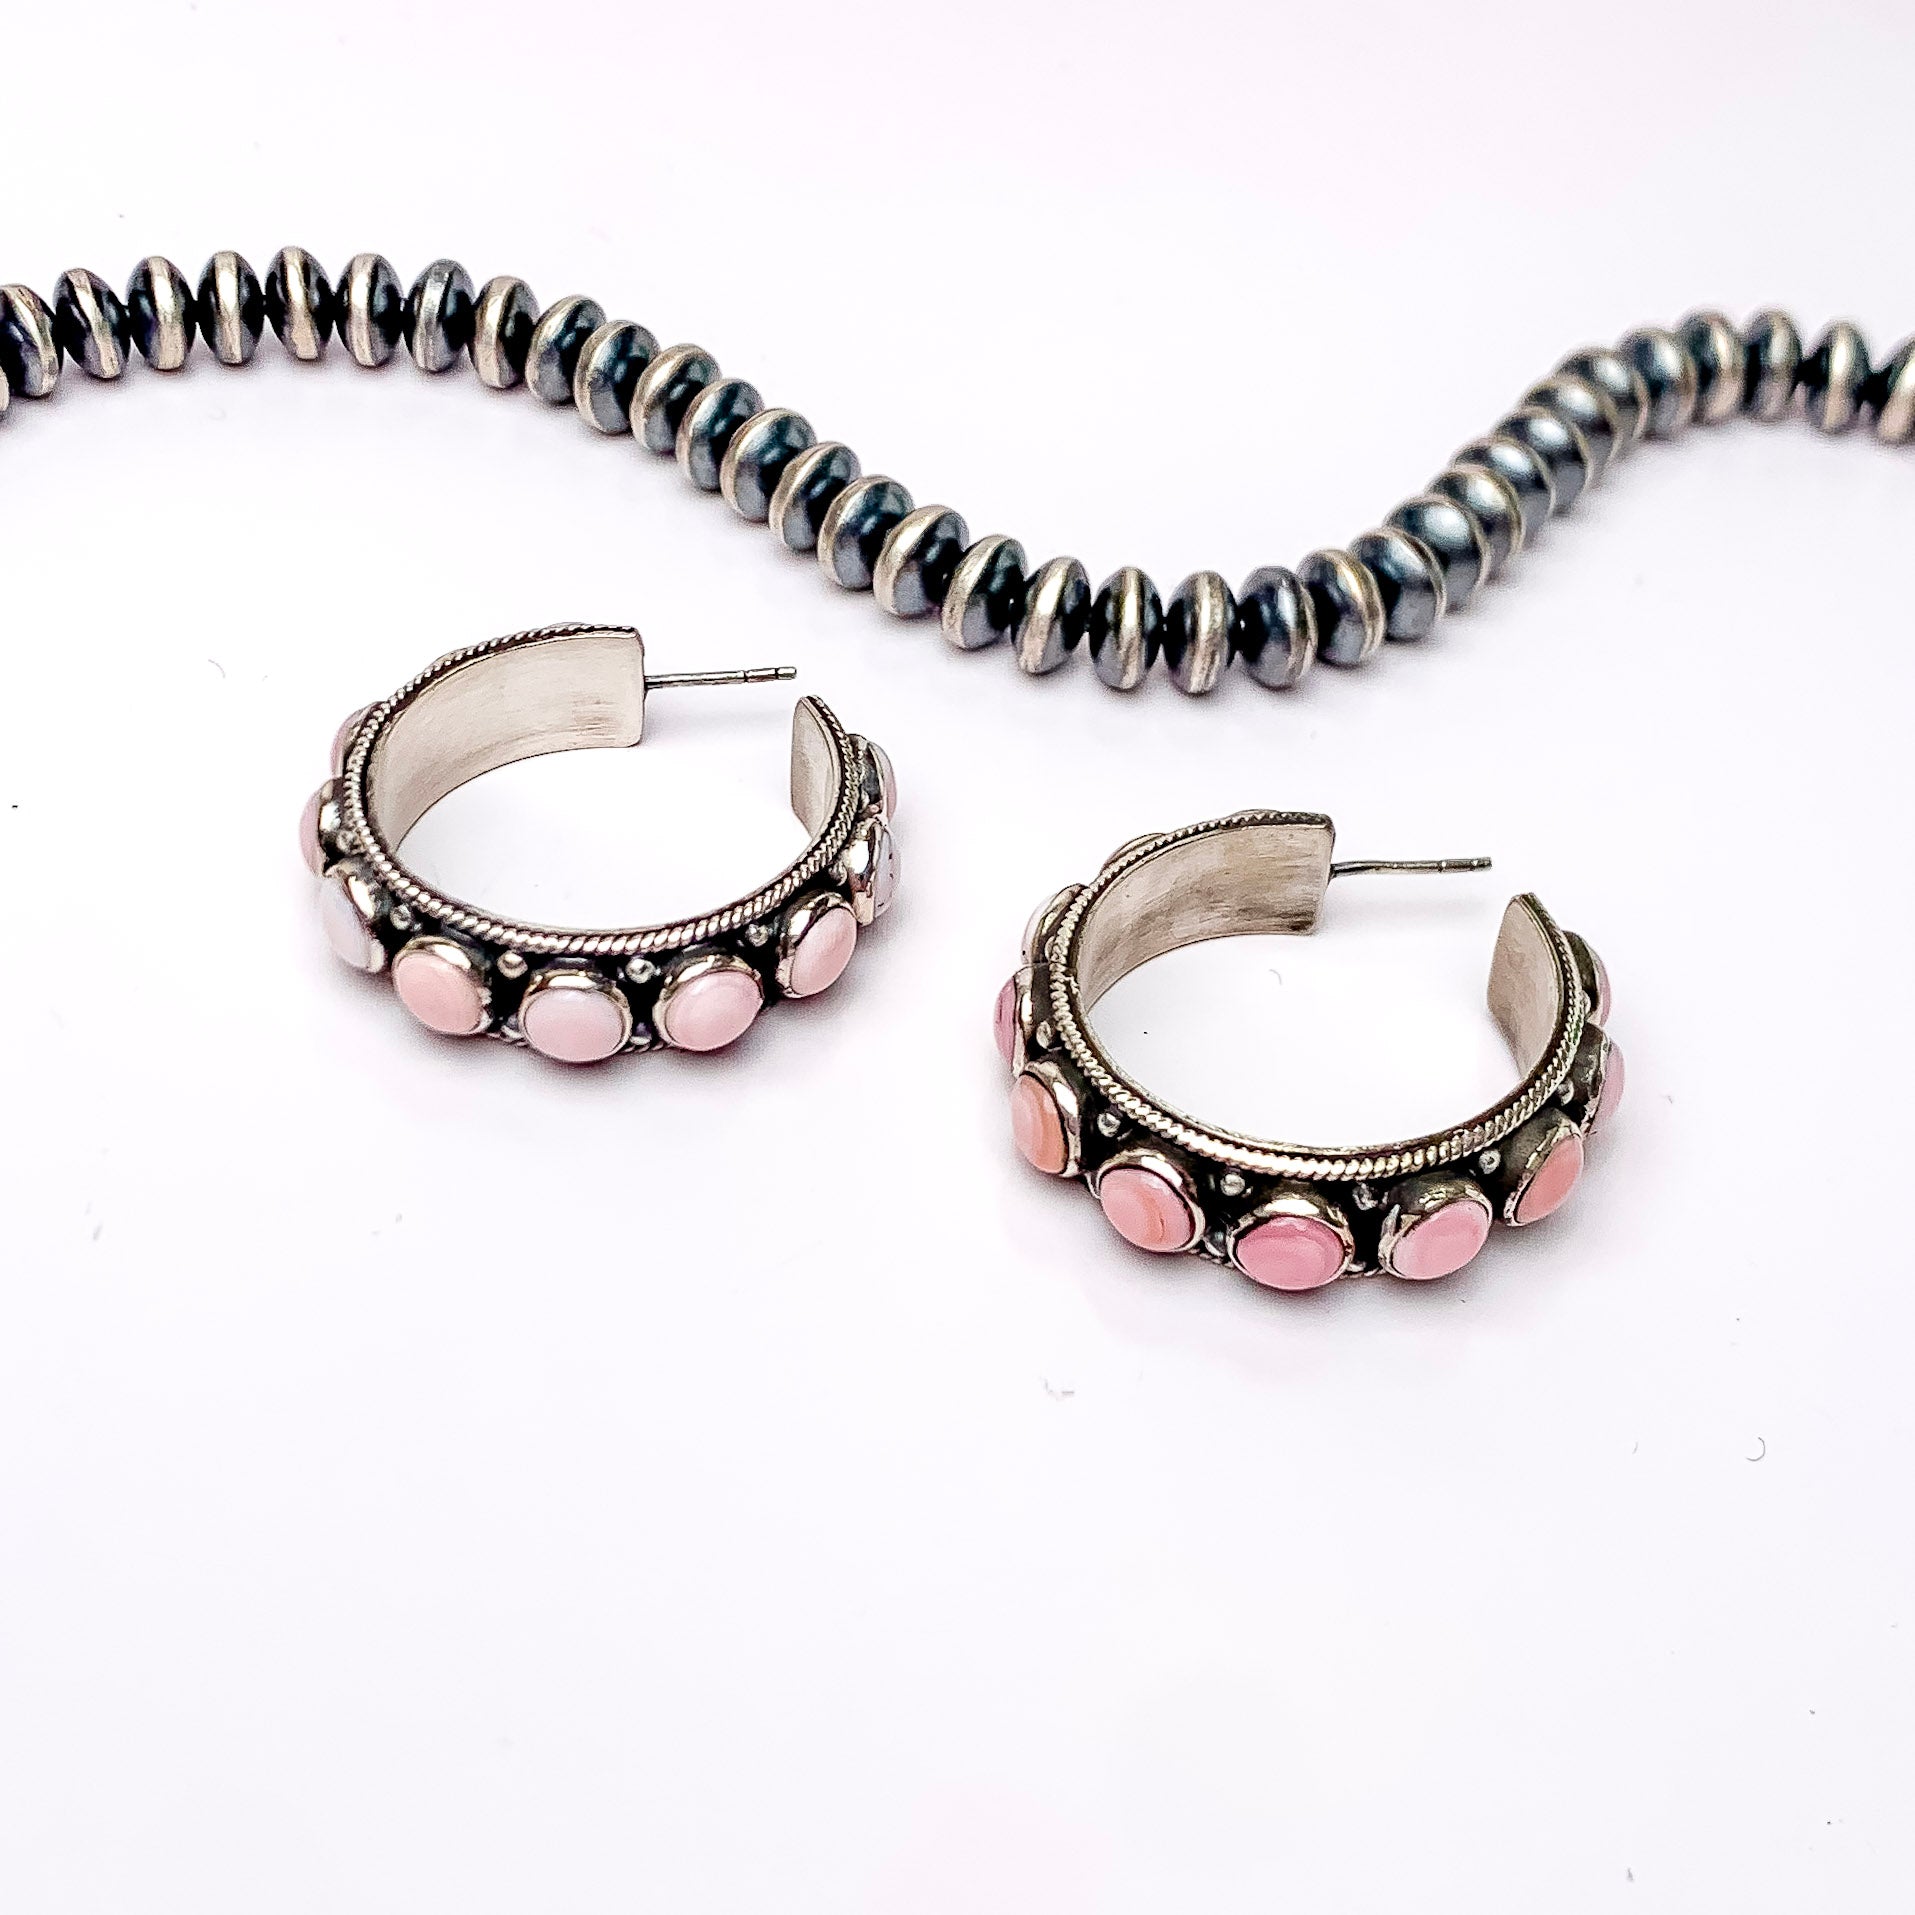 Navajo | Navajo Handmade Genuine Sterling Silver Hoops with Conch Pink Stones - Giddy Up Glamour Boutique